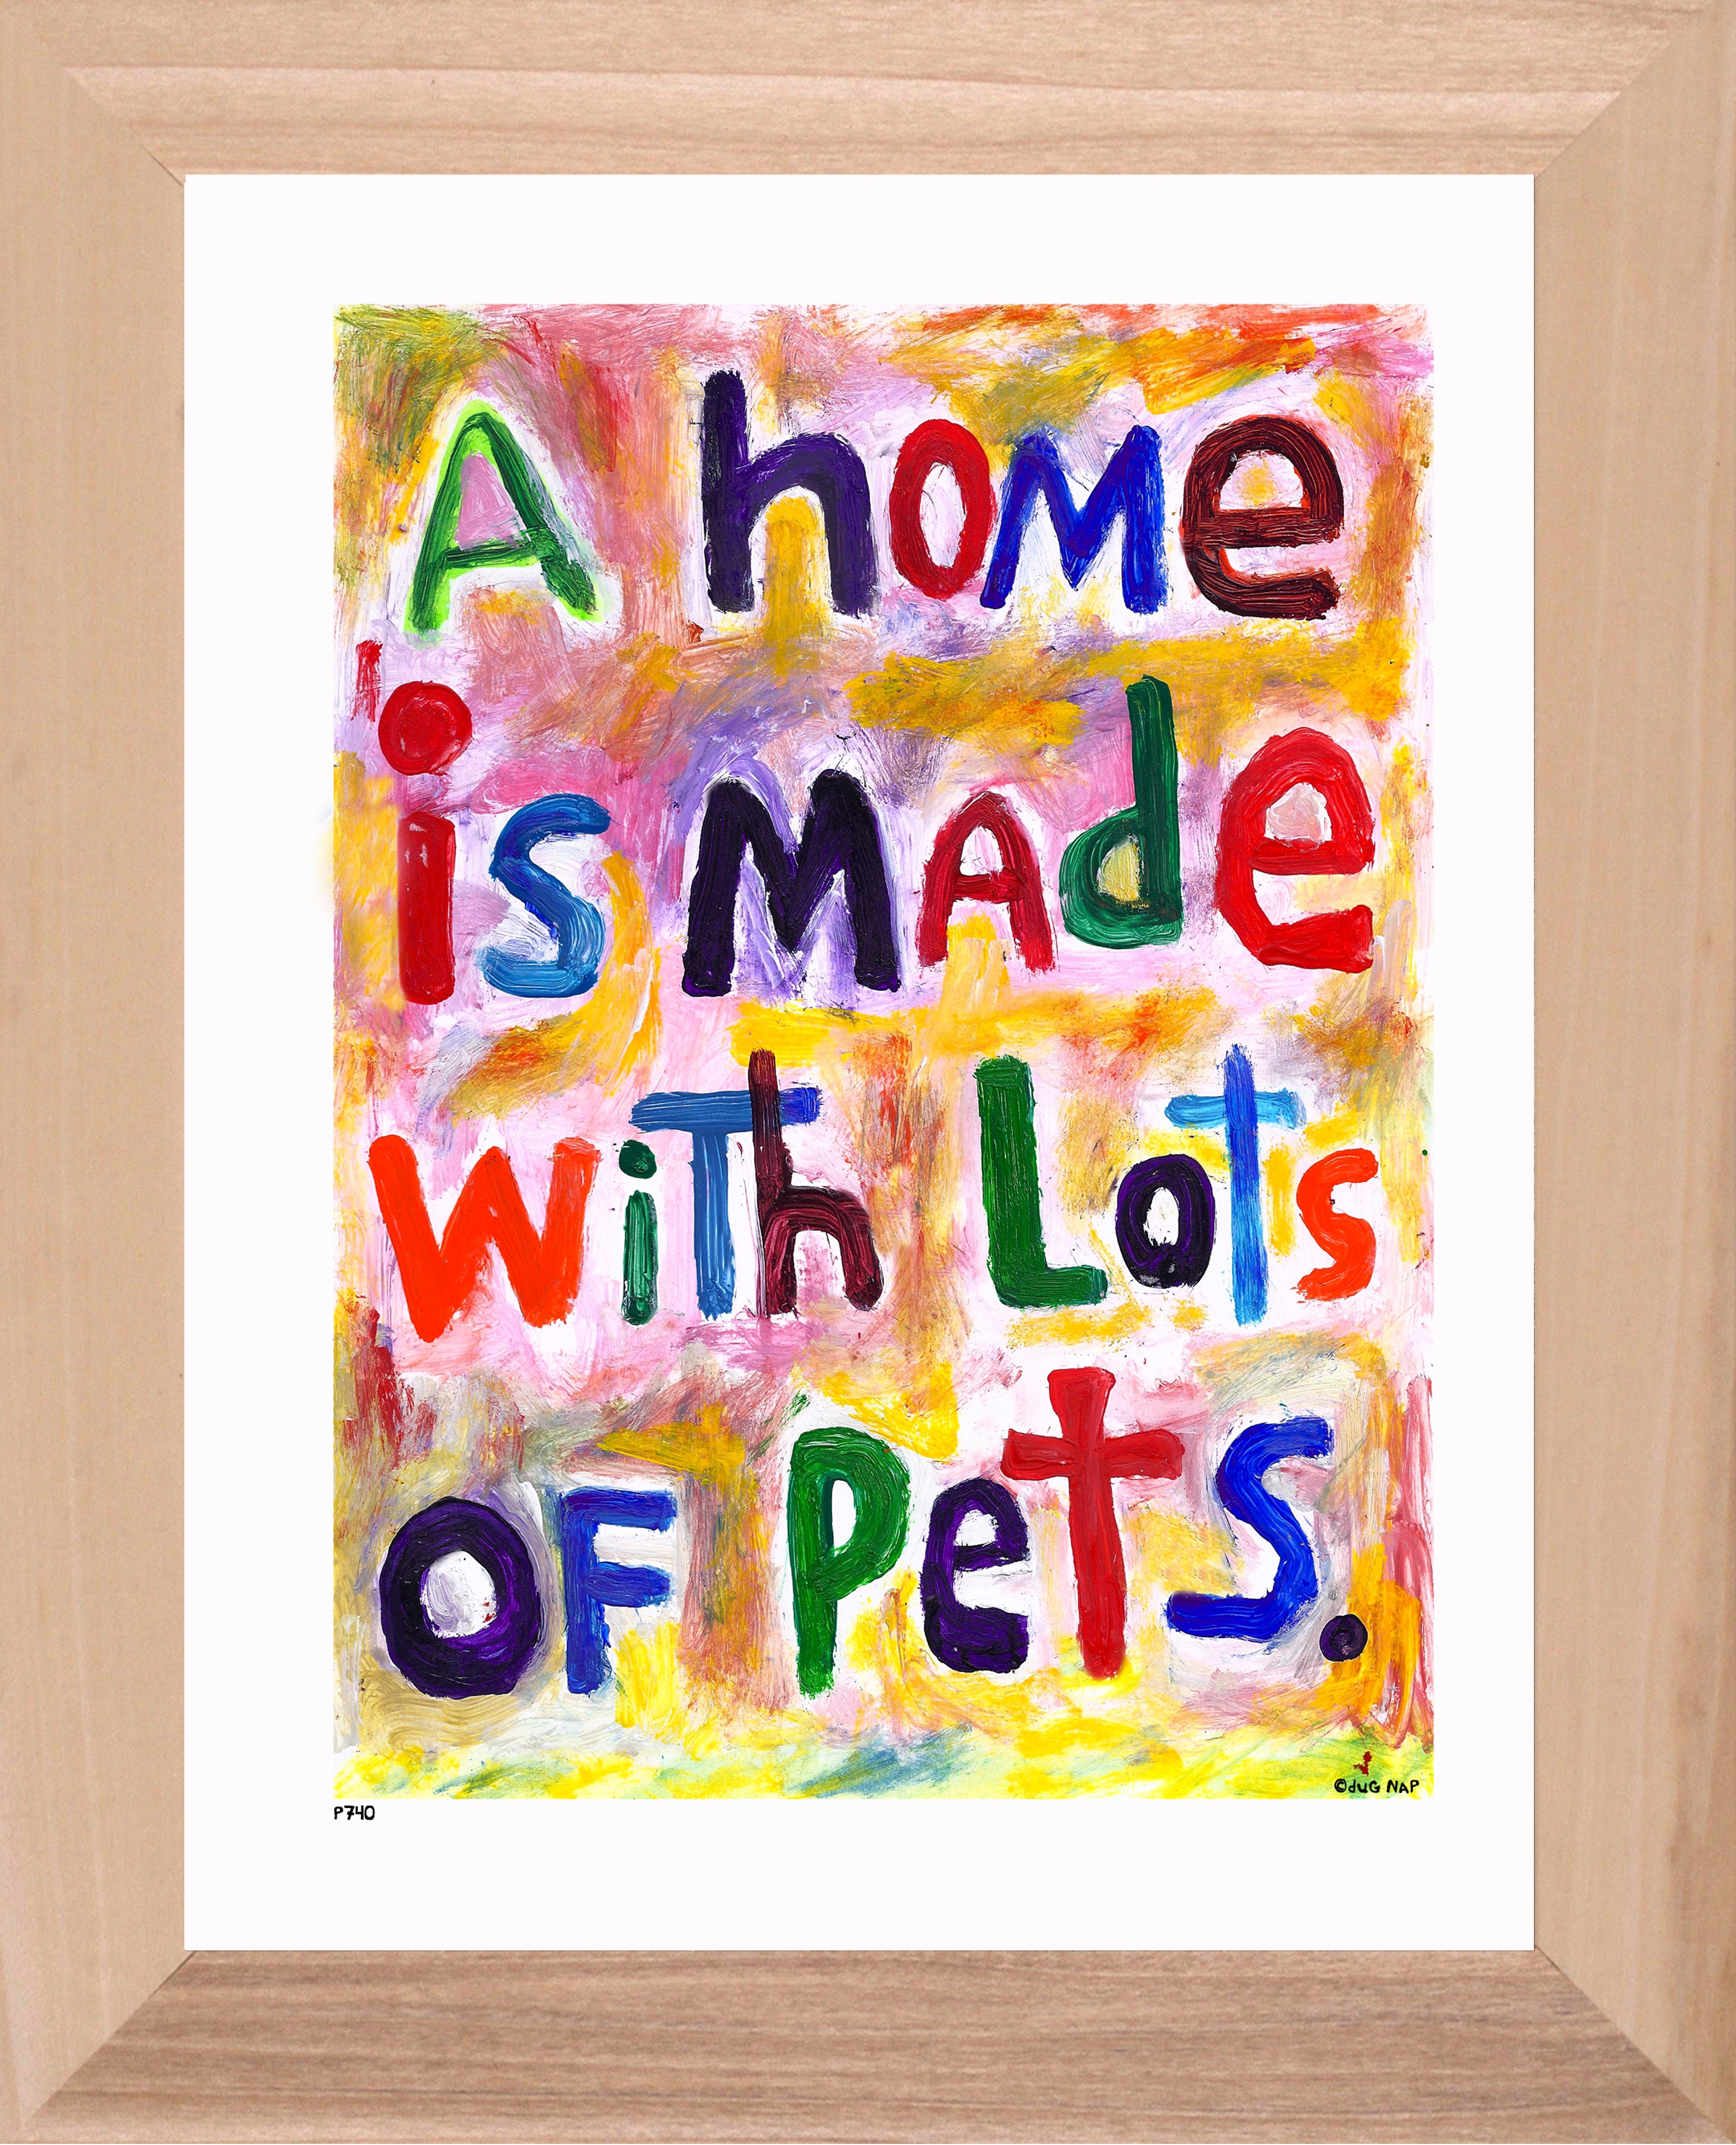 P740 - Pet Filled Home